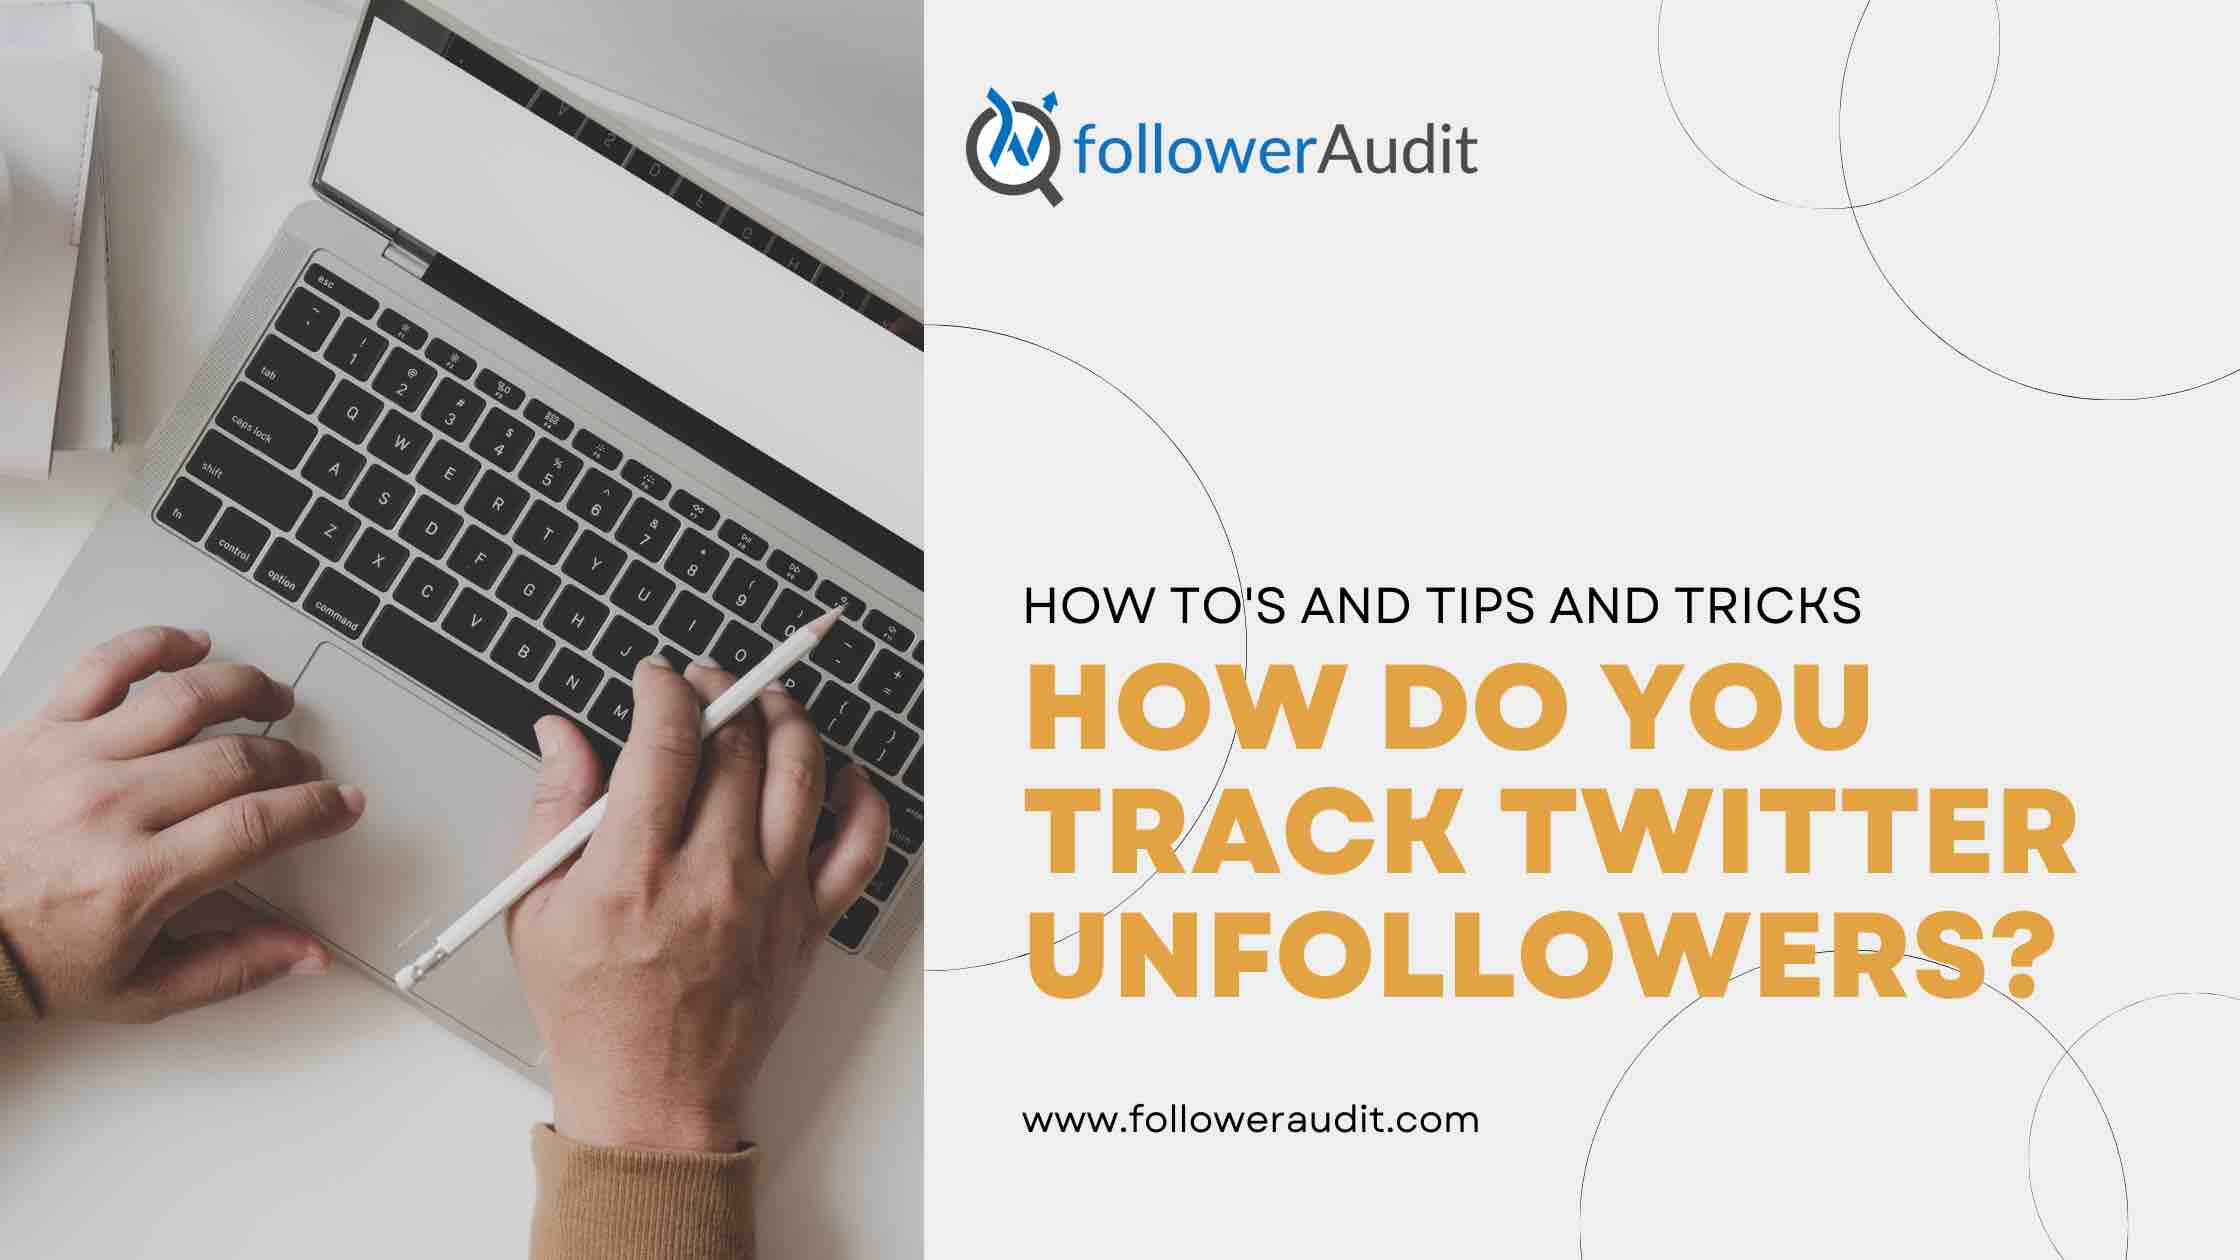 How Do You Track Twitter Unfollowers?